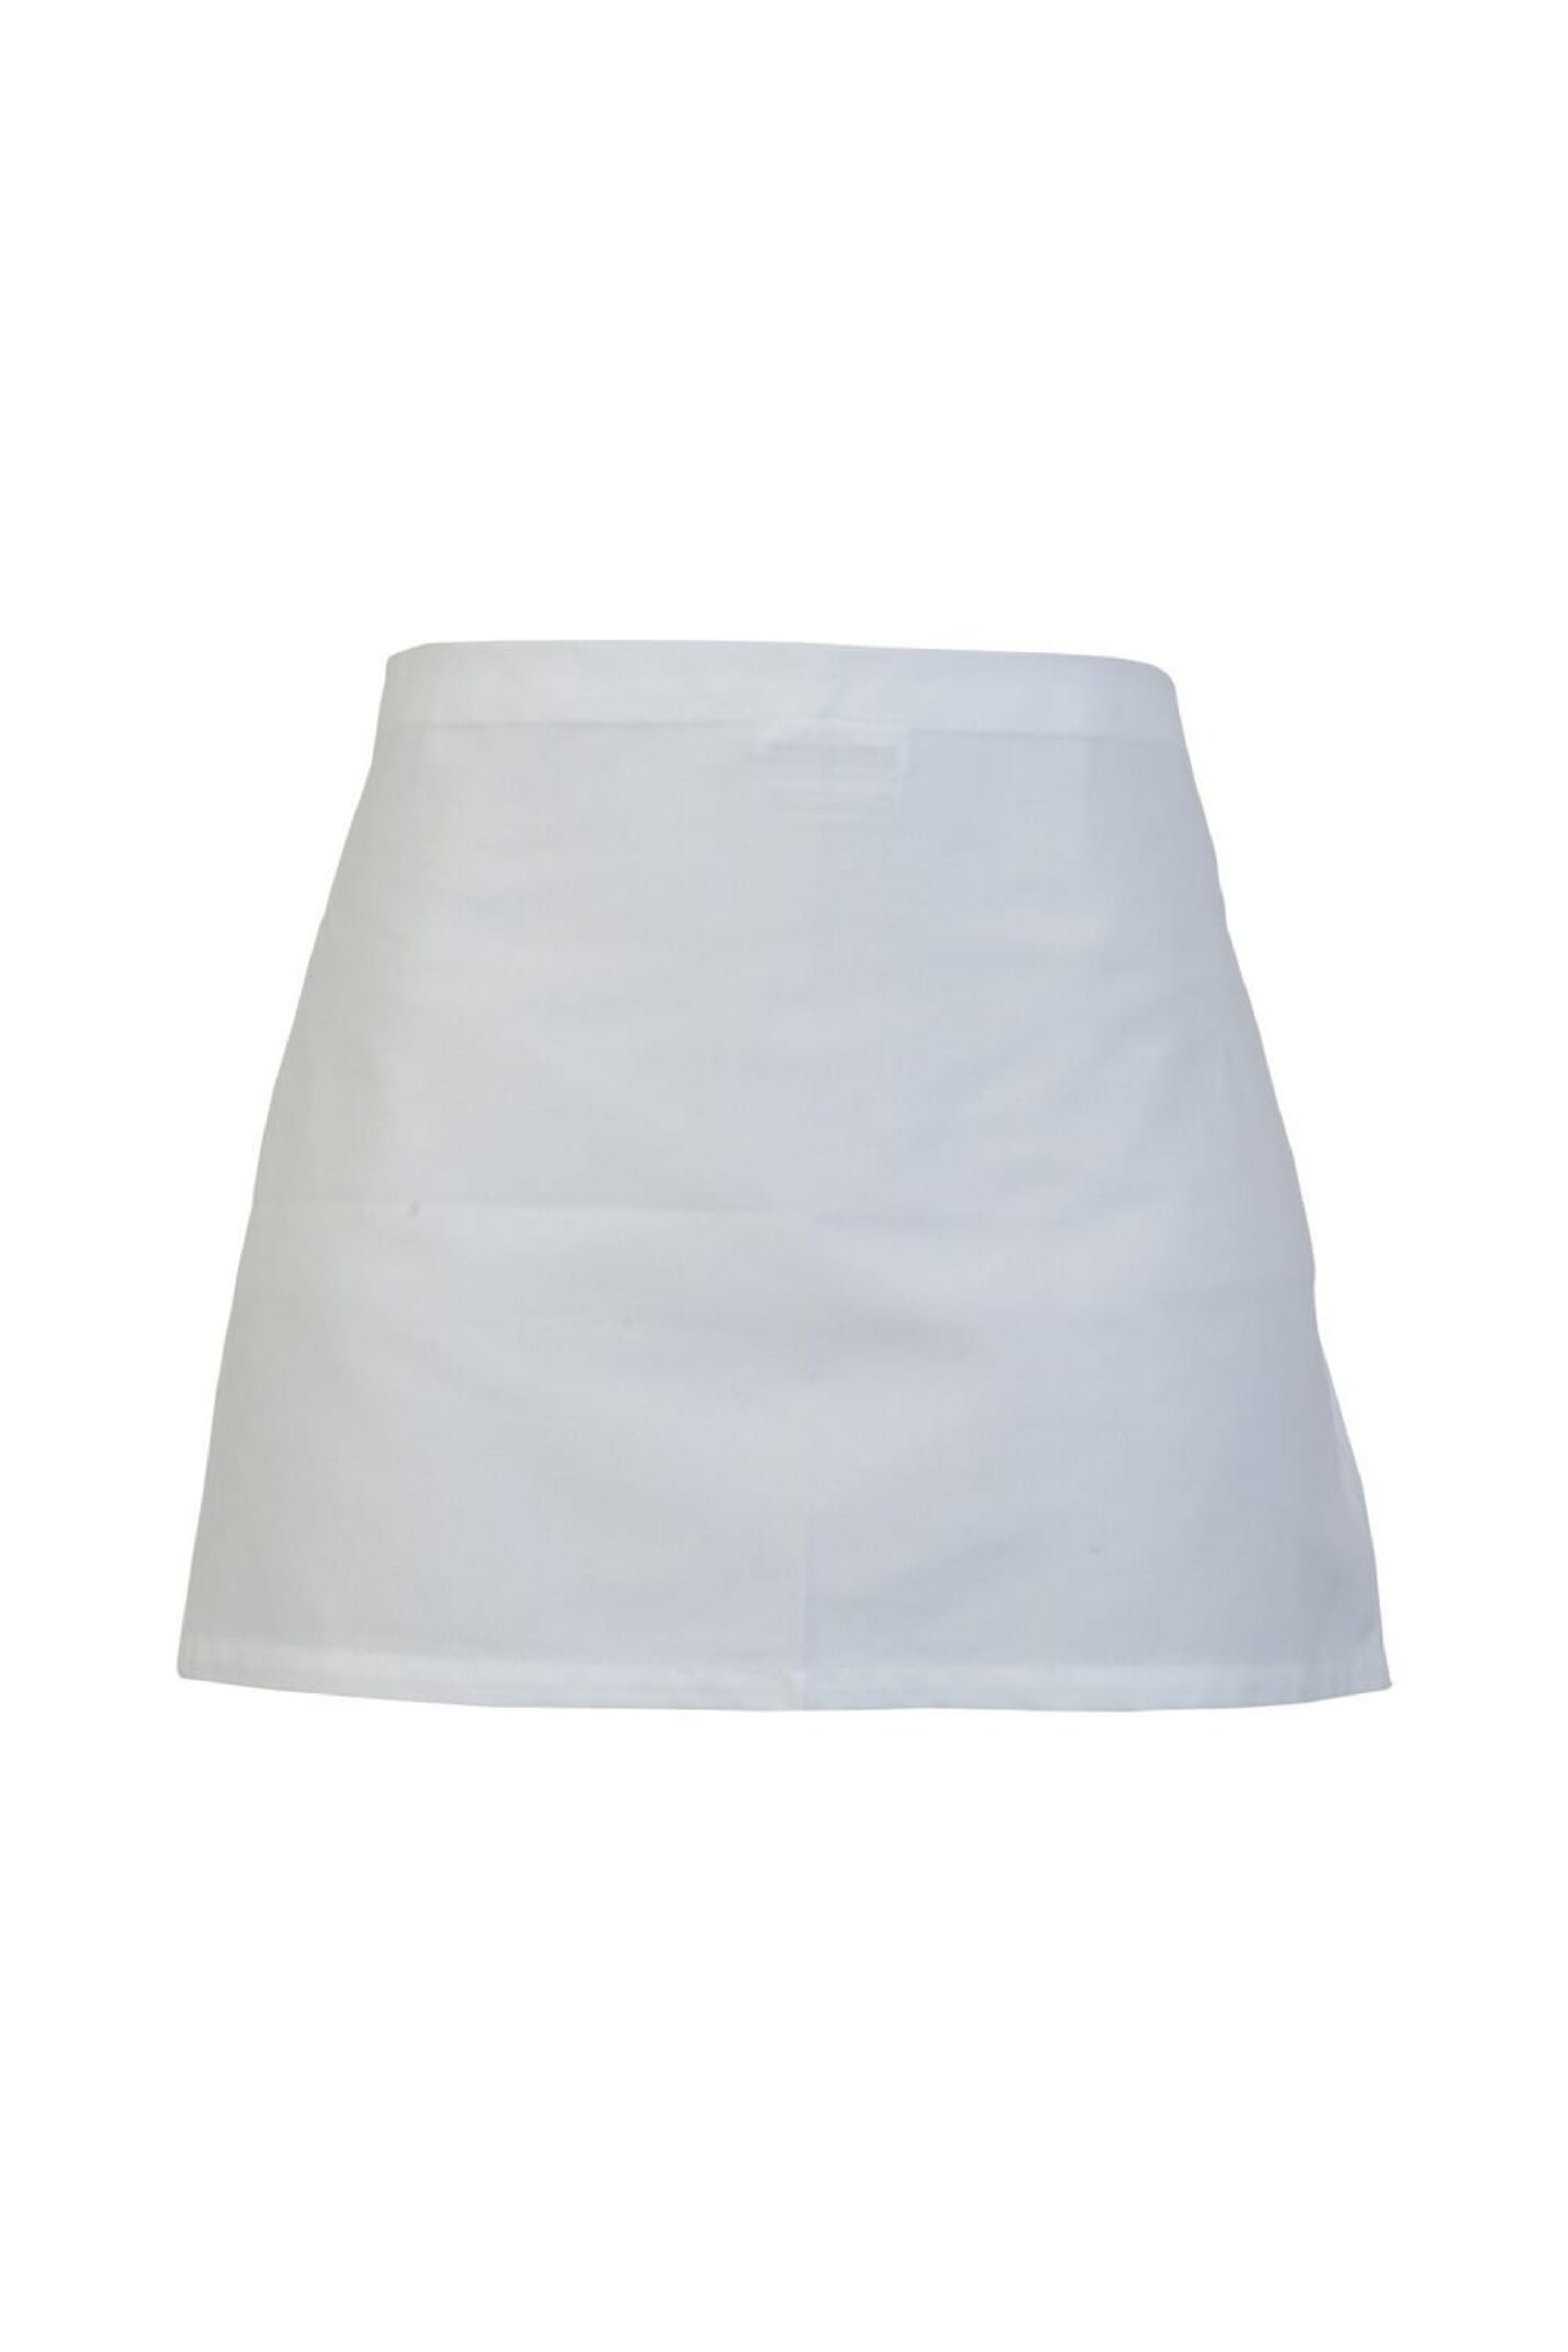 ABSOLUTE APPAREL ABSOLUTE APPAREL ADULTS WORKWEAR WAIST APRON IN WHITE